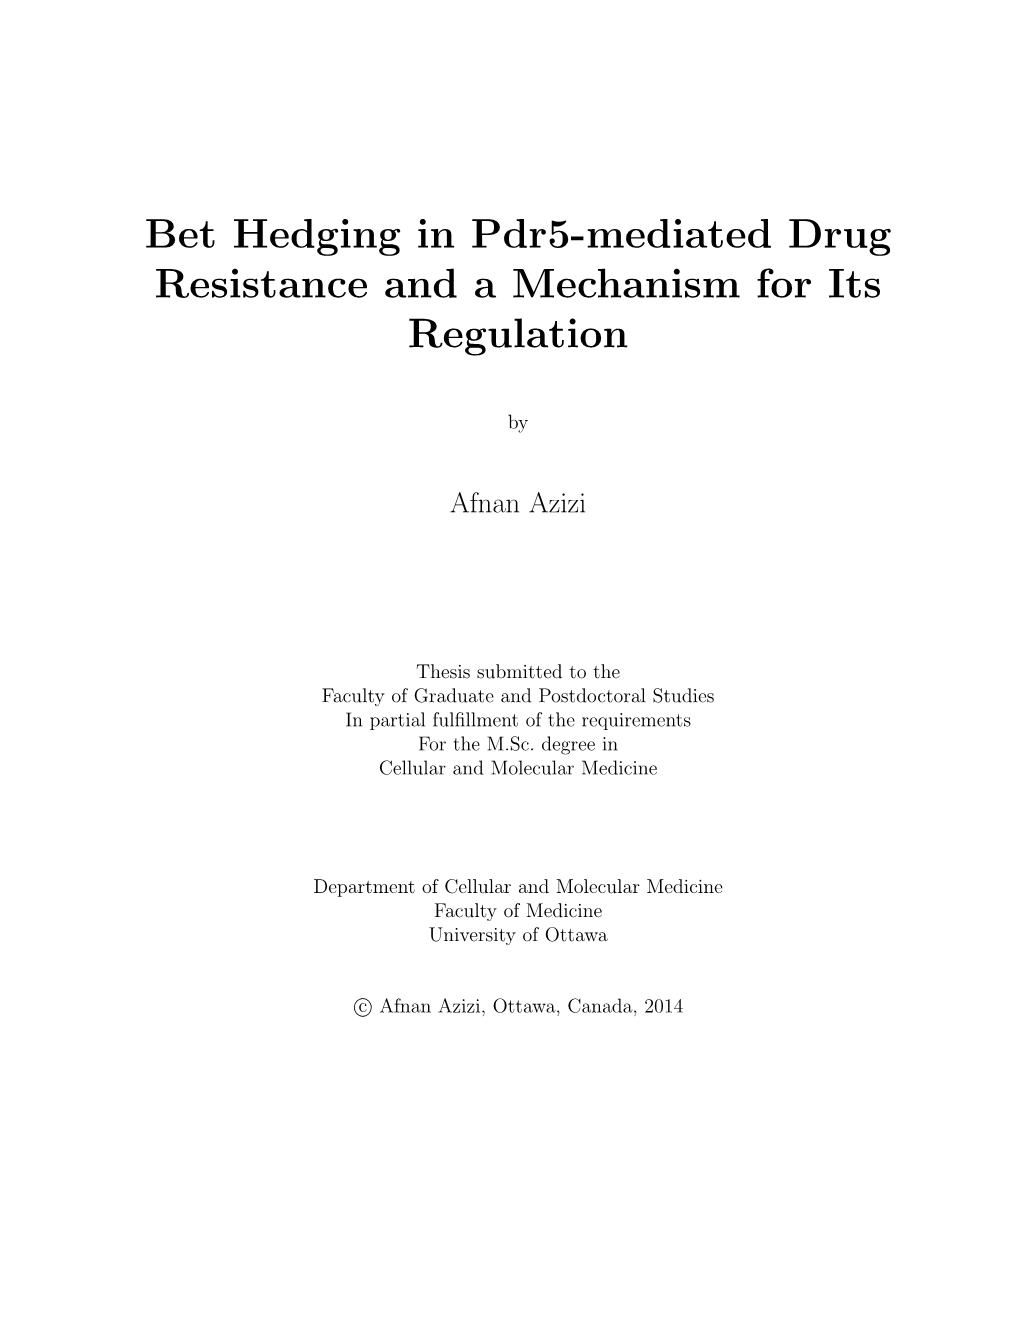 Bet Hedging in Pdr5-Mediated Drug Resistance and a Mechanism for Its Regulation